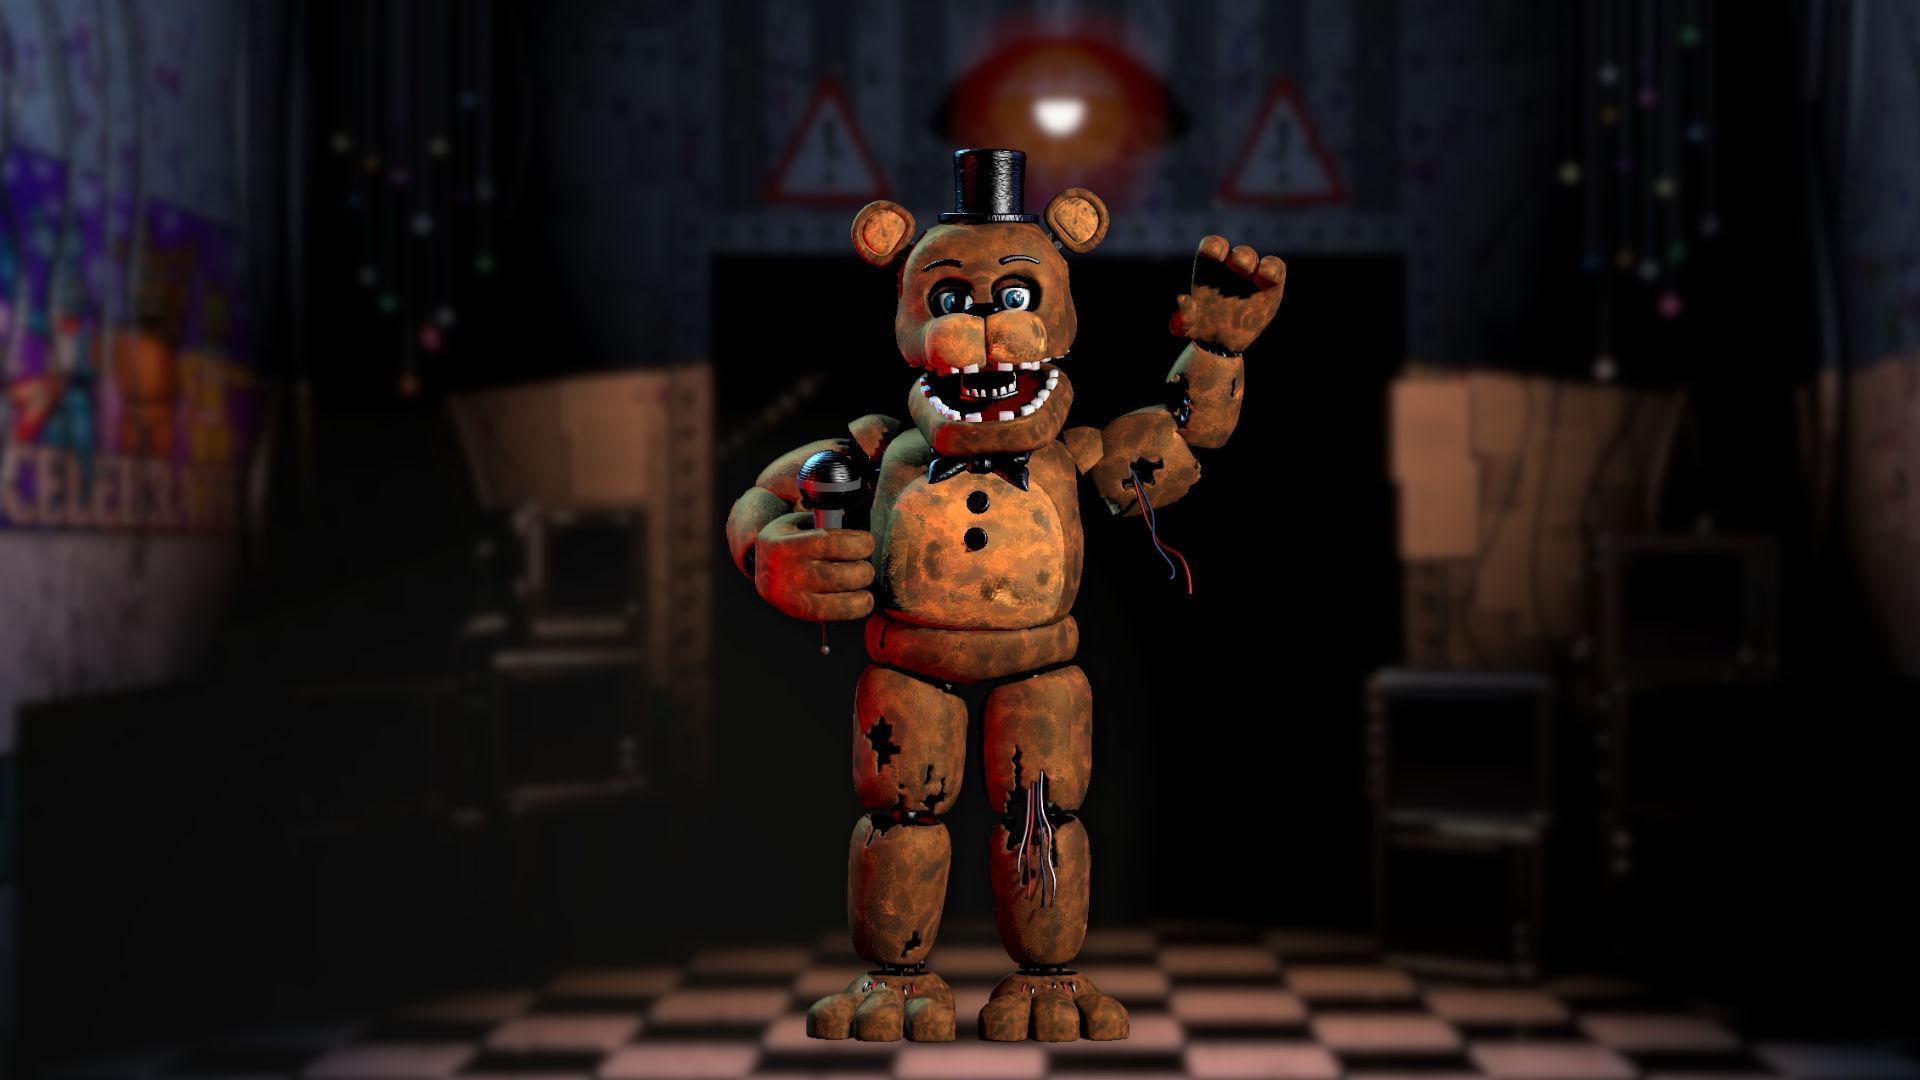 https://www.pockettactics.com/wp-content/sites/pockettactics/2023/03/FNAF-freddy-withered.jpg